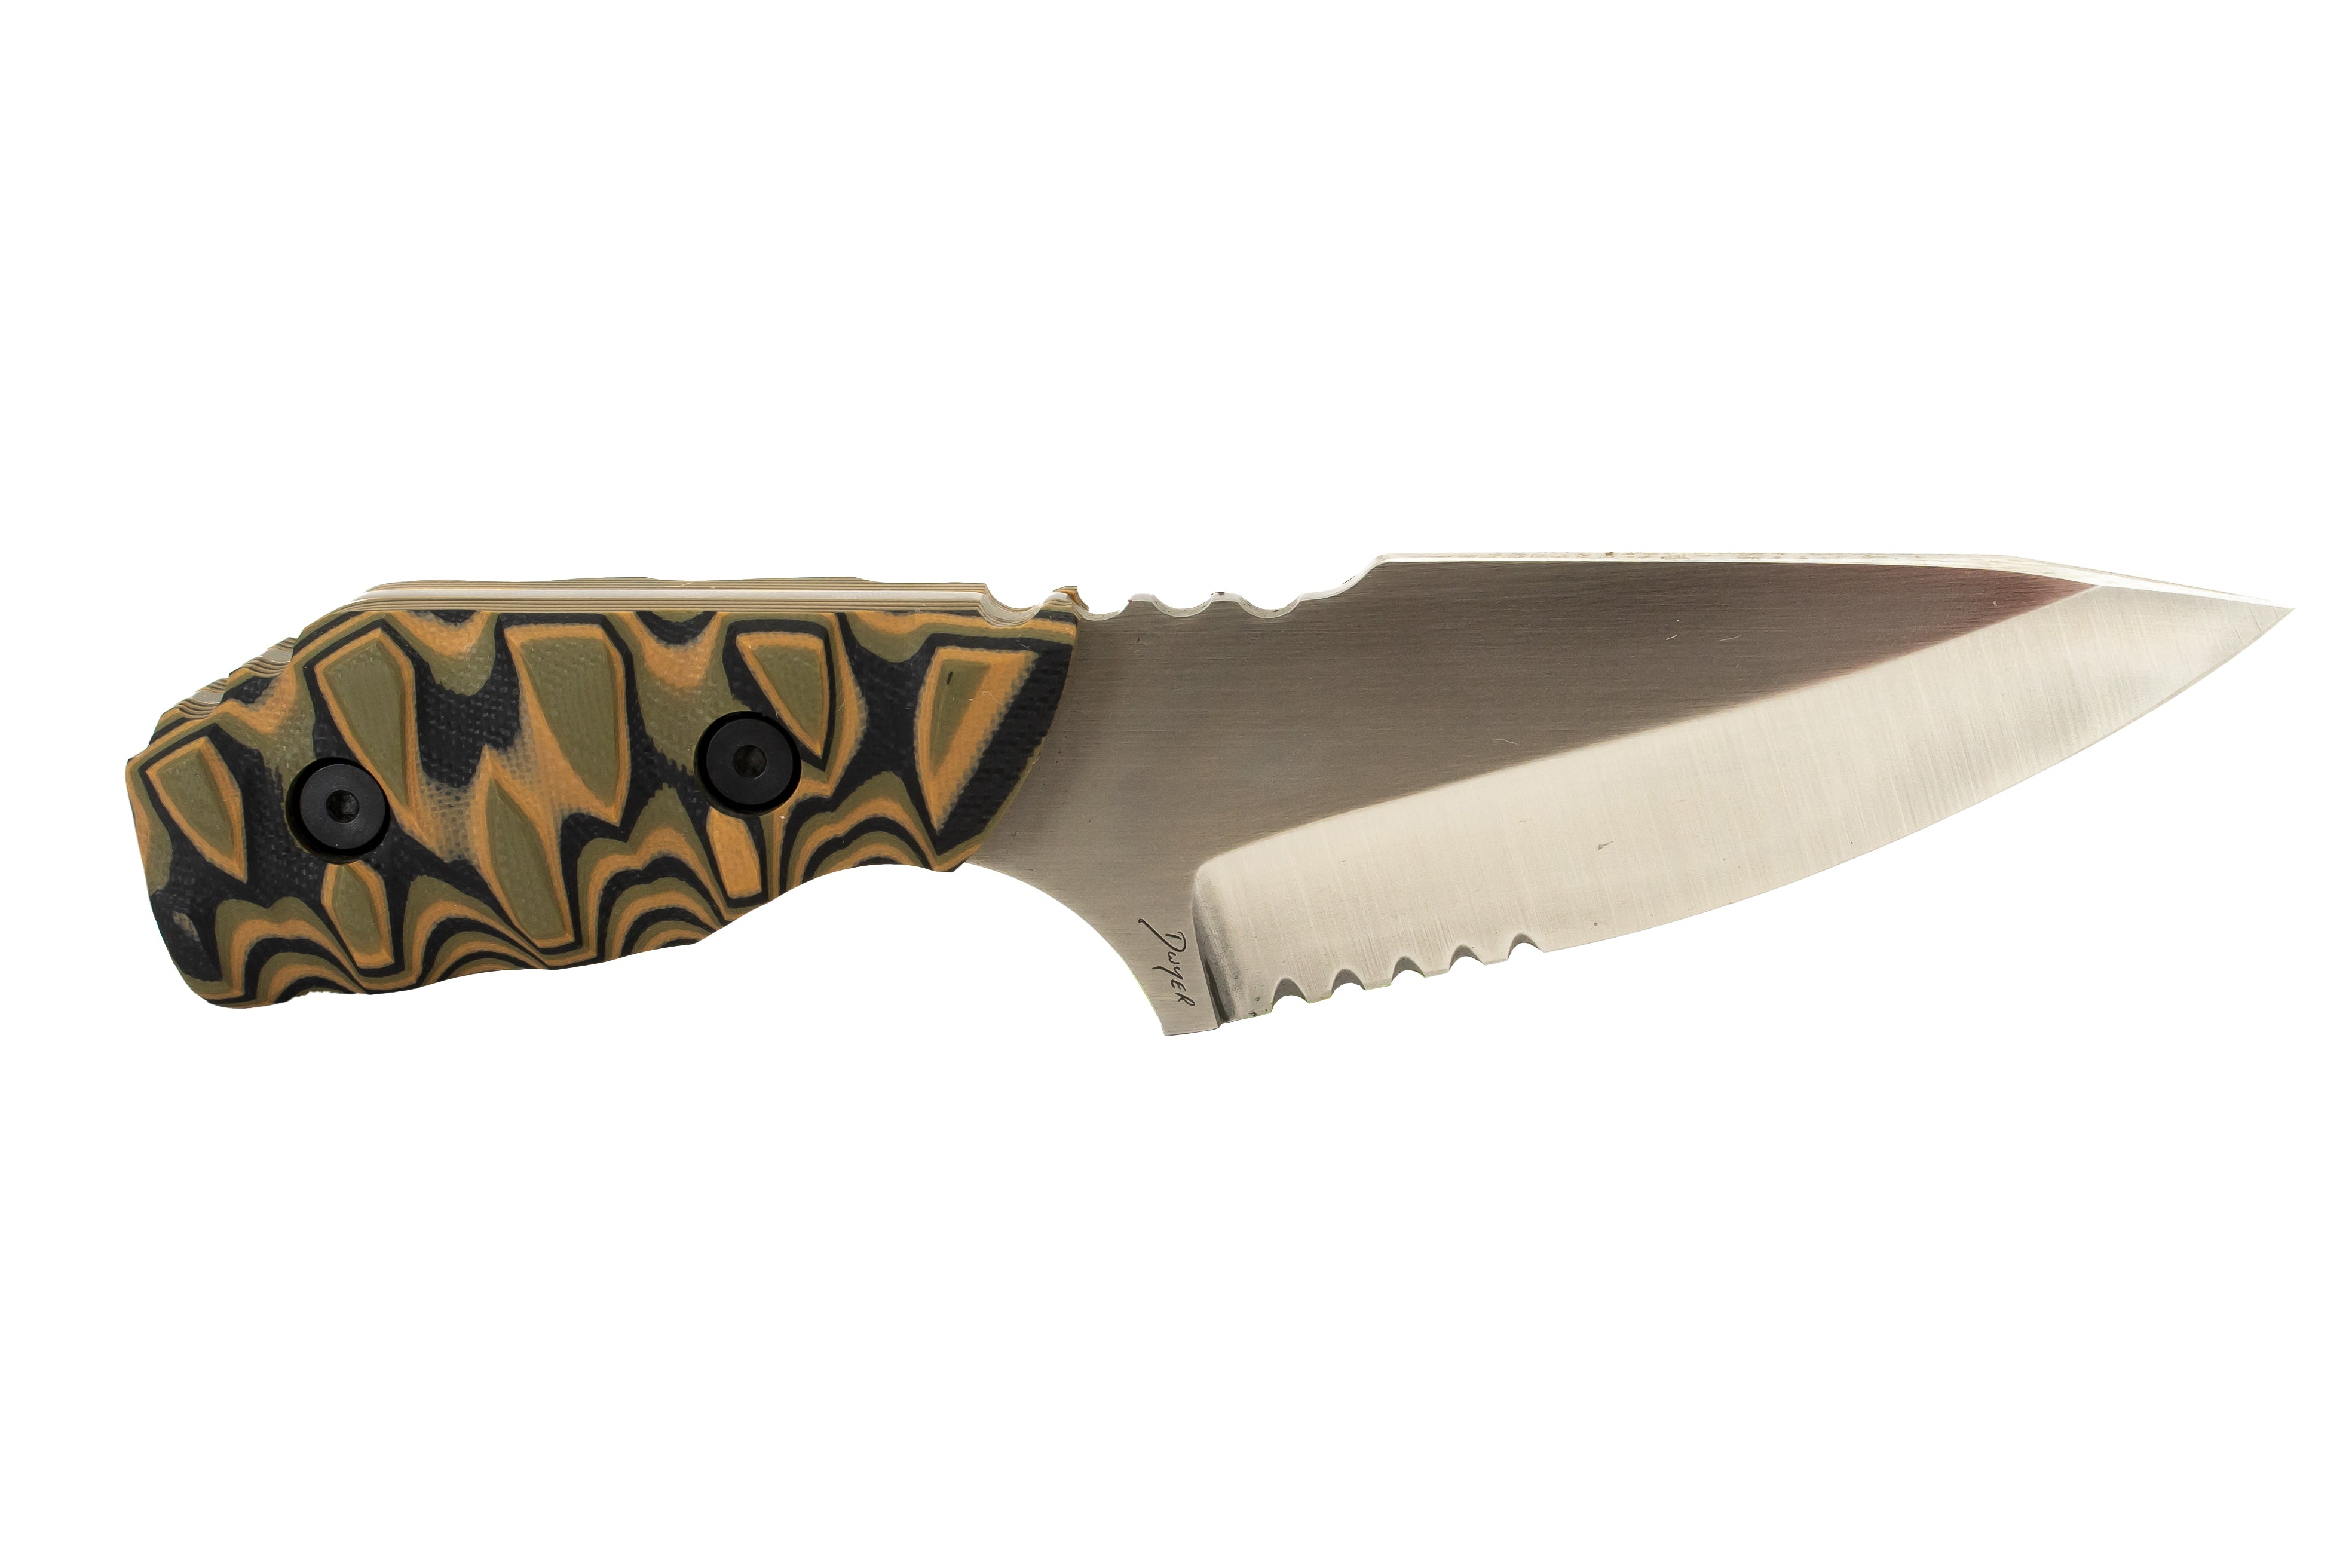 Tommy Knife® Bravo with G10 Caveman Grip